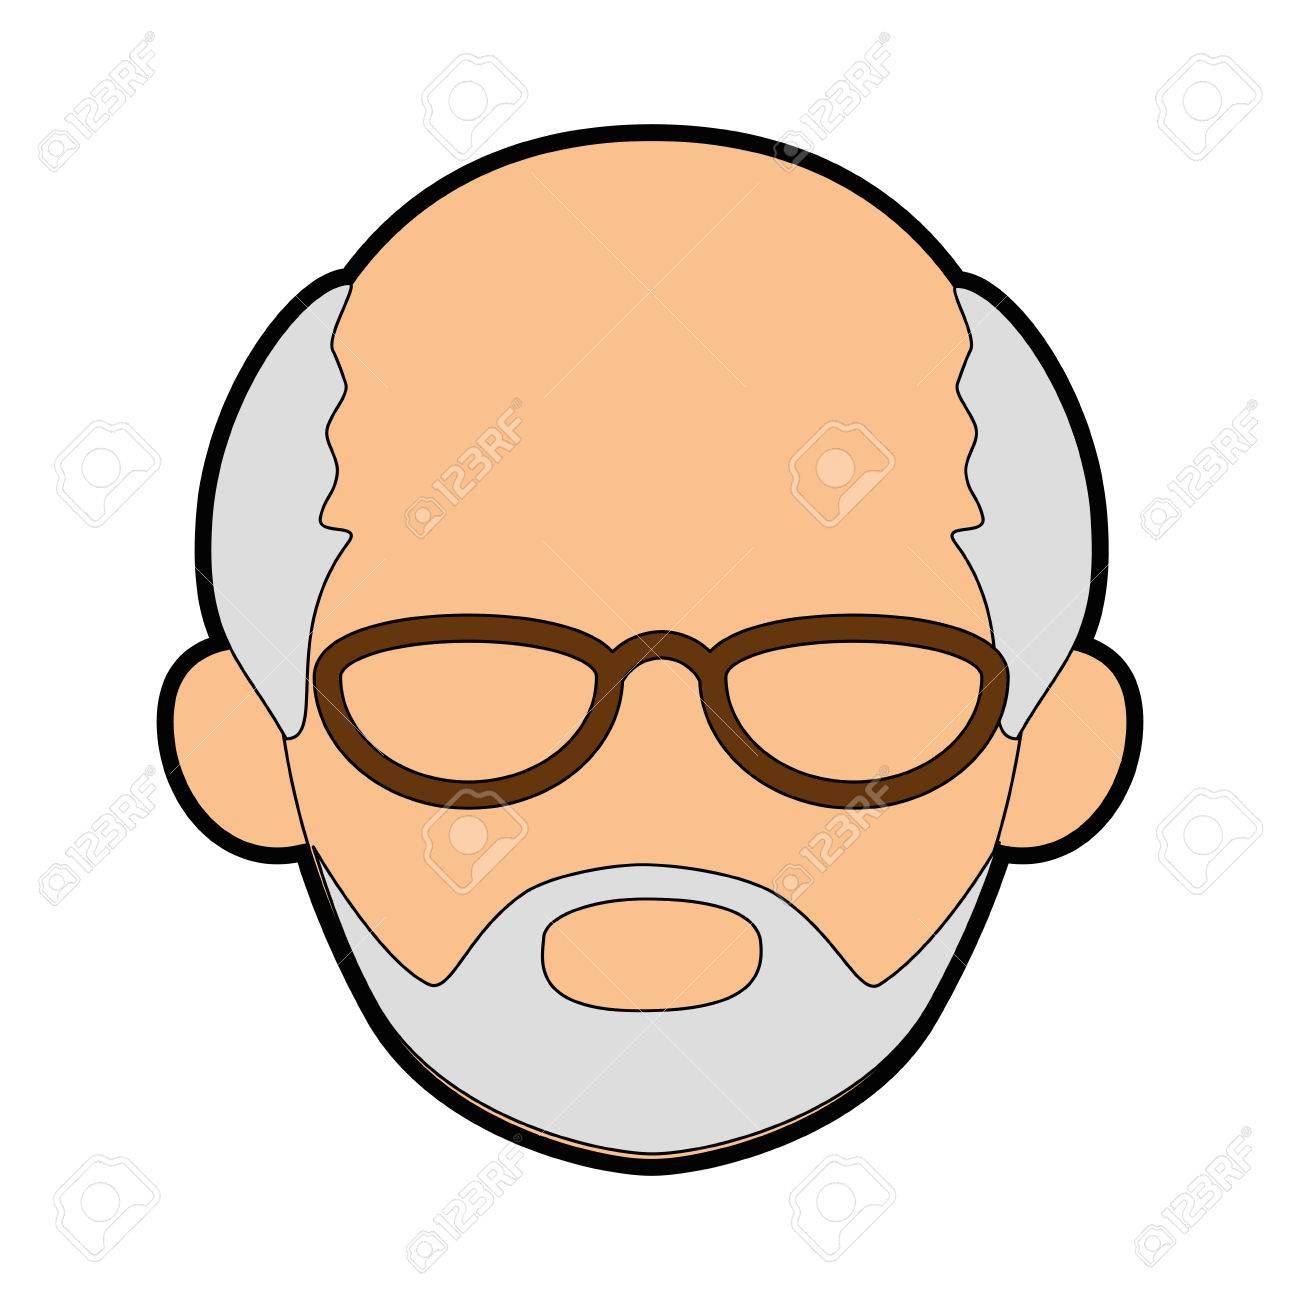 old clipart old face